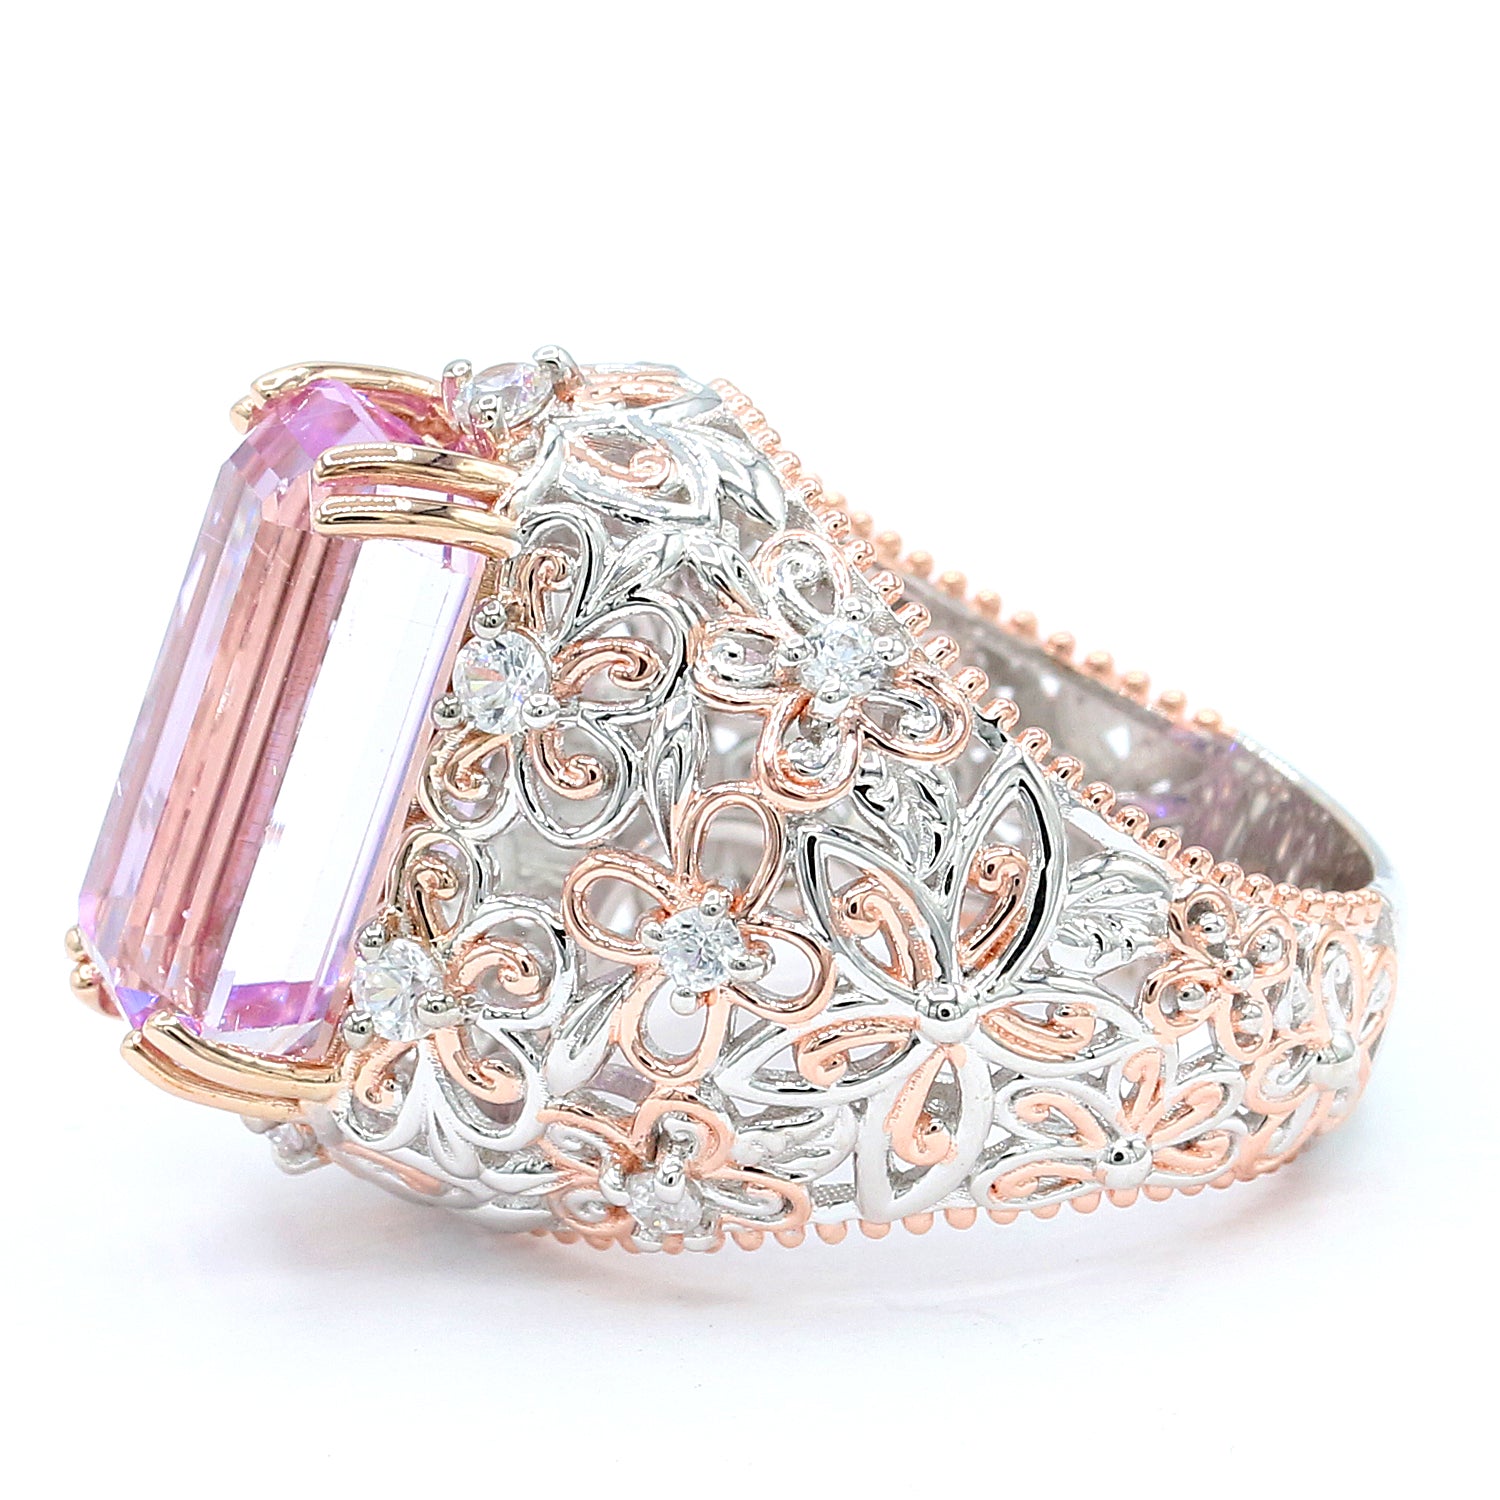 Limited Edition Gems en Vogue Luxe One-of-a-Kind 11.53ctw Kunzite & White Zircon Ring